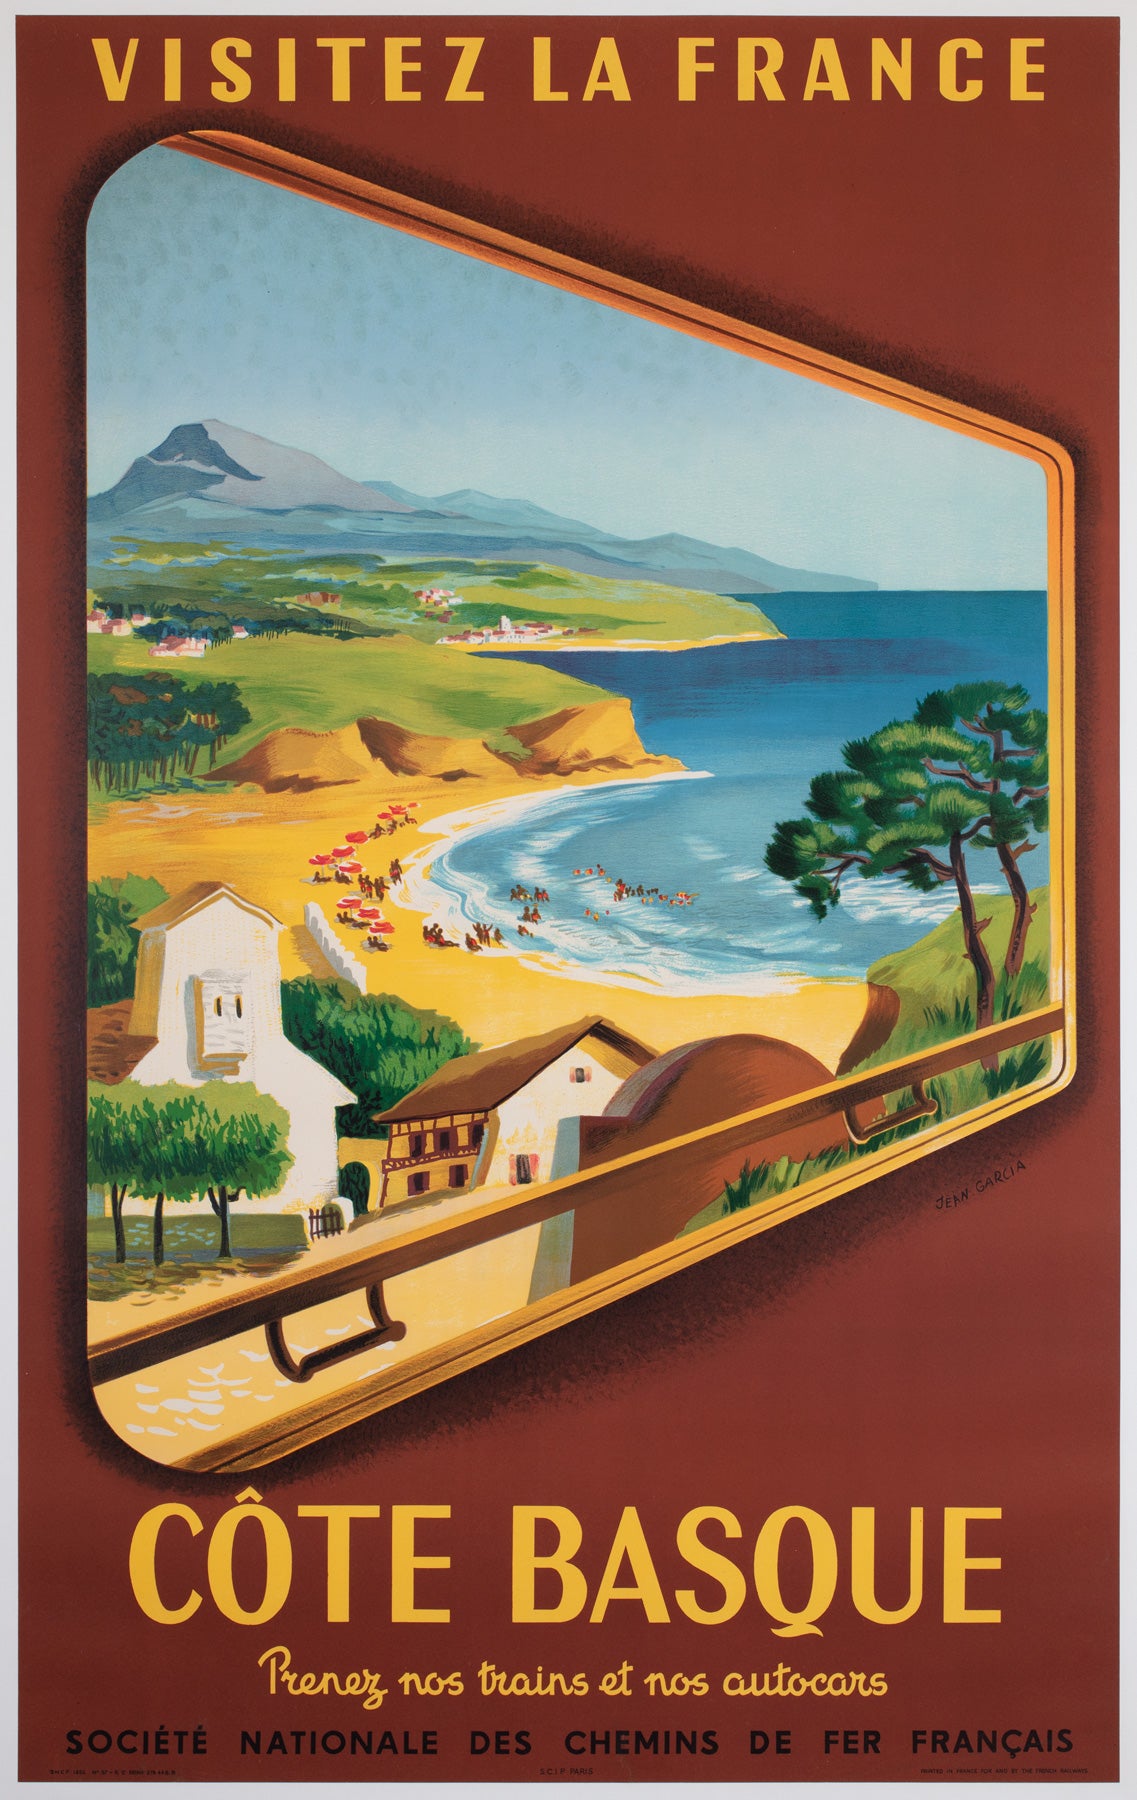 Cote Basque 1952 SNCF French Railway Travel Advertising Poster, Jean Garcia